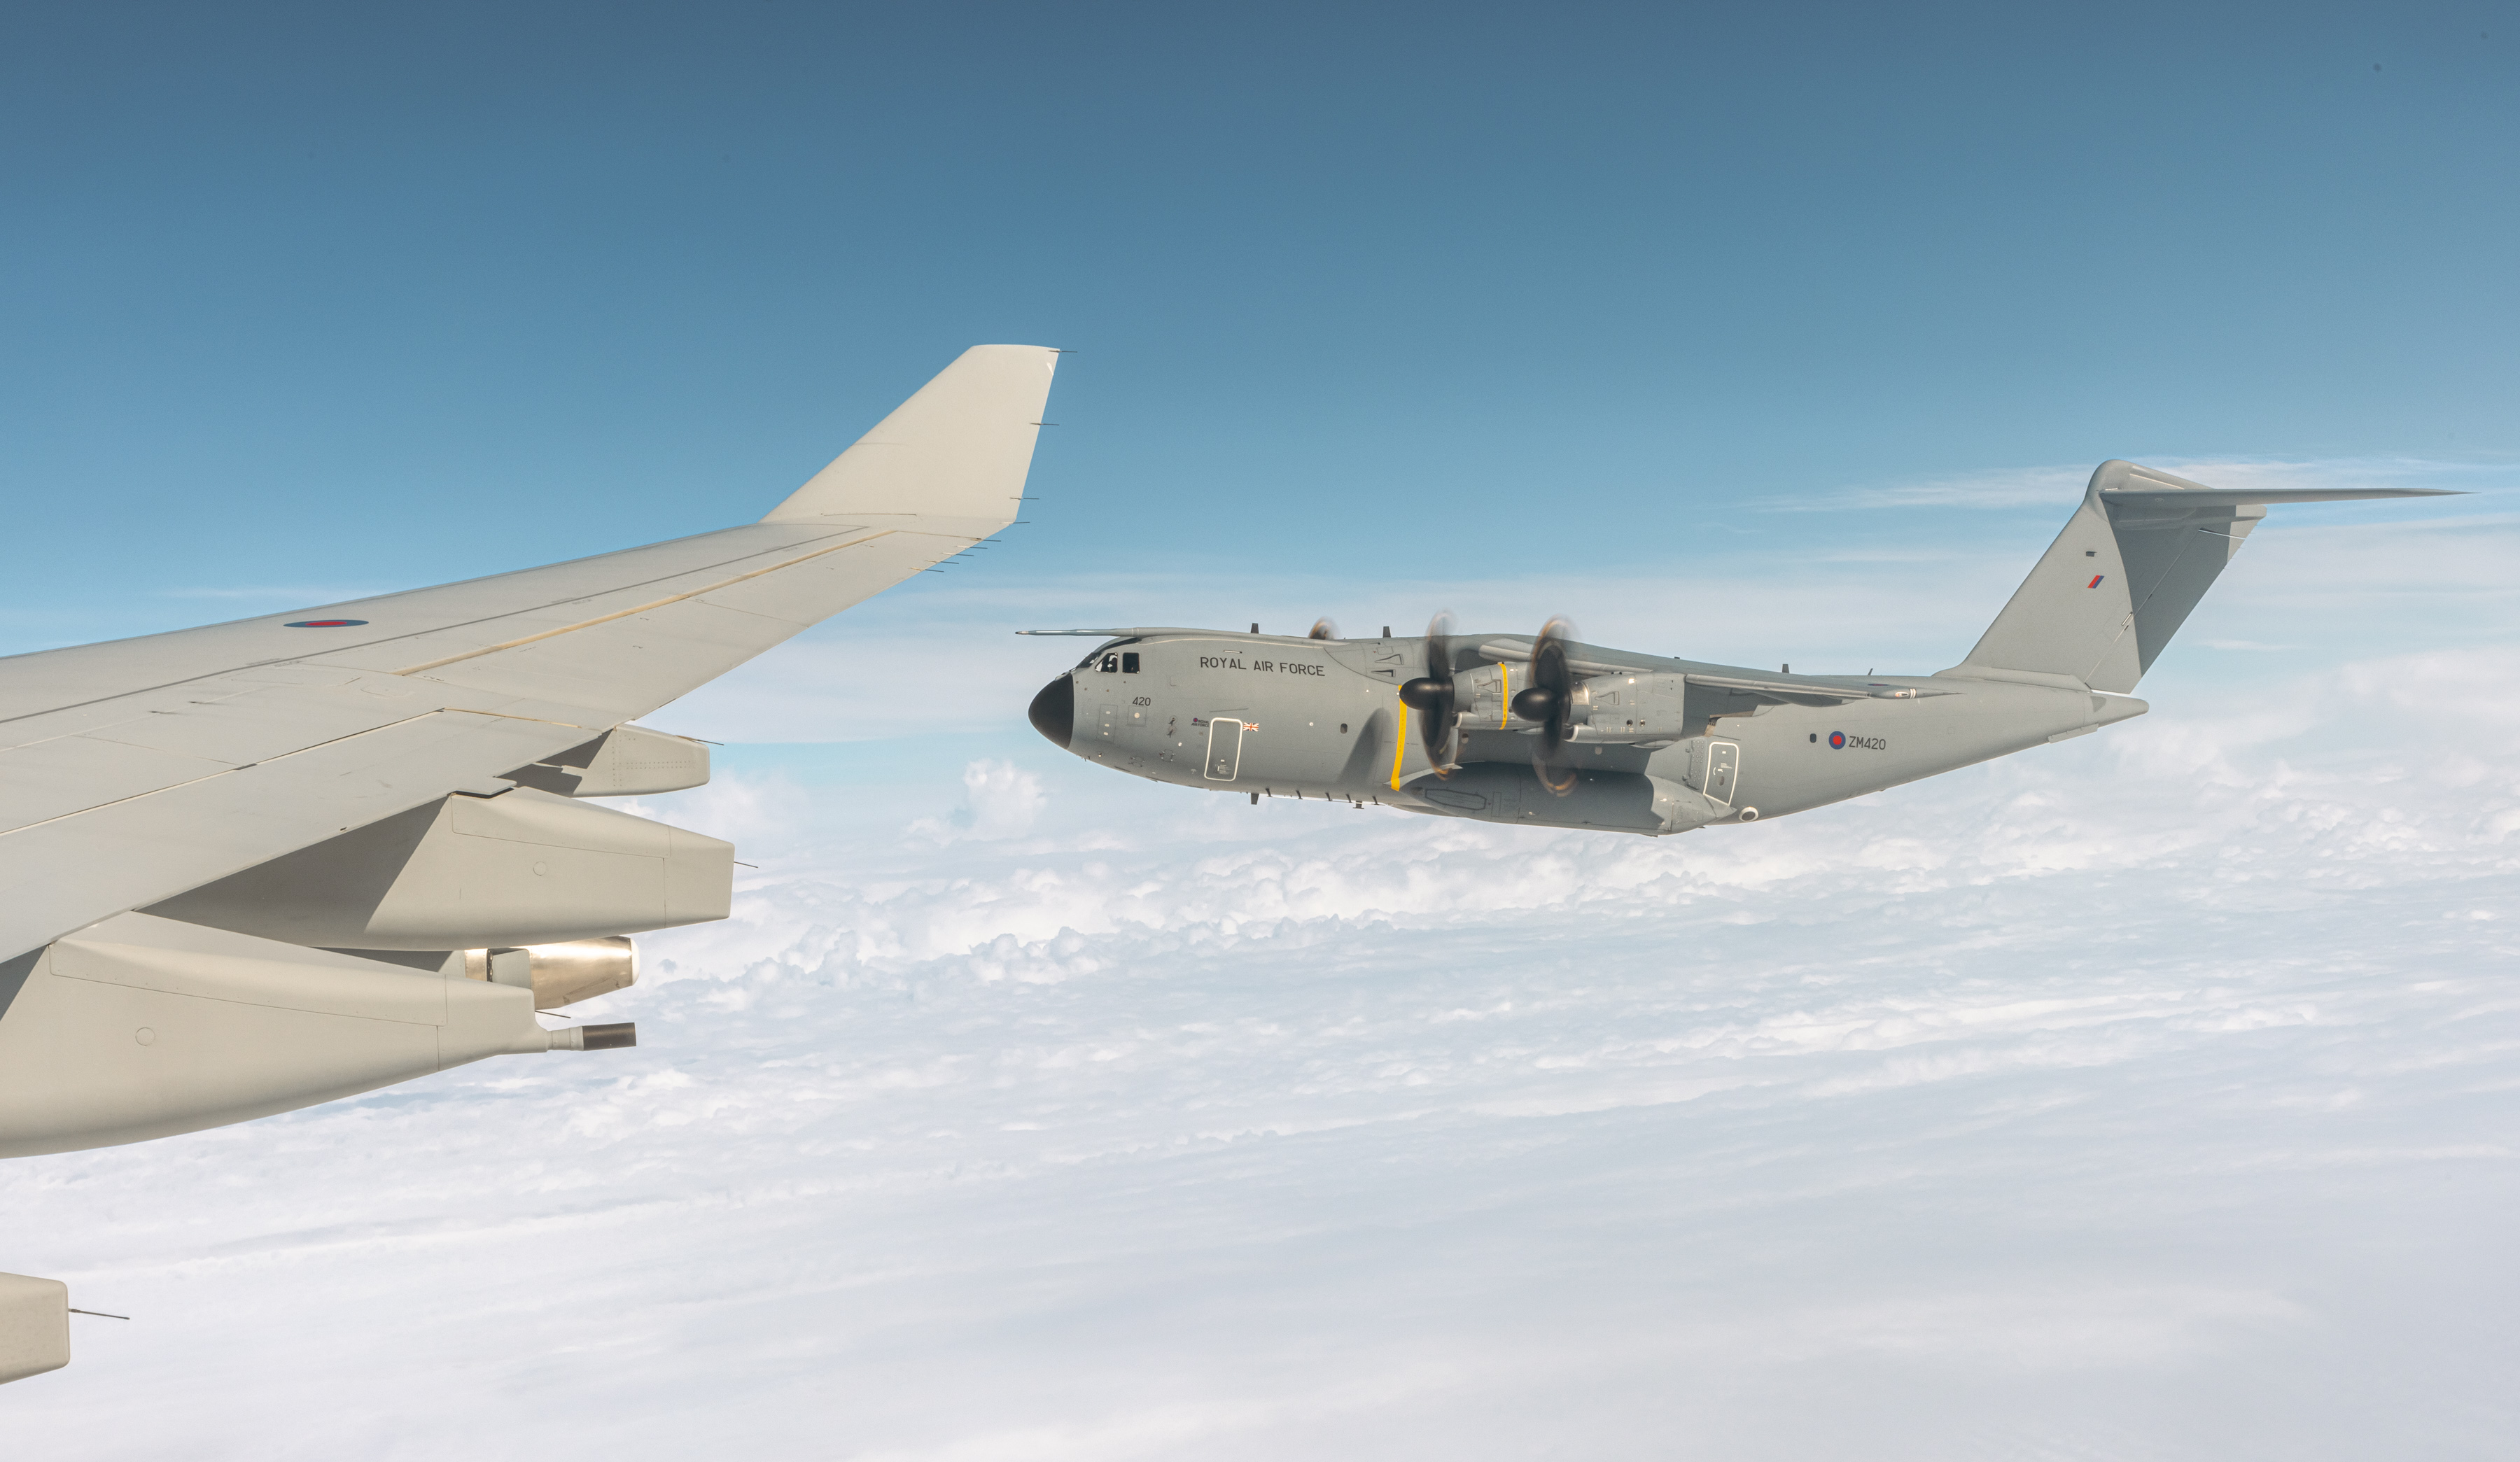 A400M flying alongside Voyager aircraft